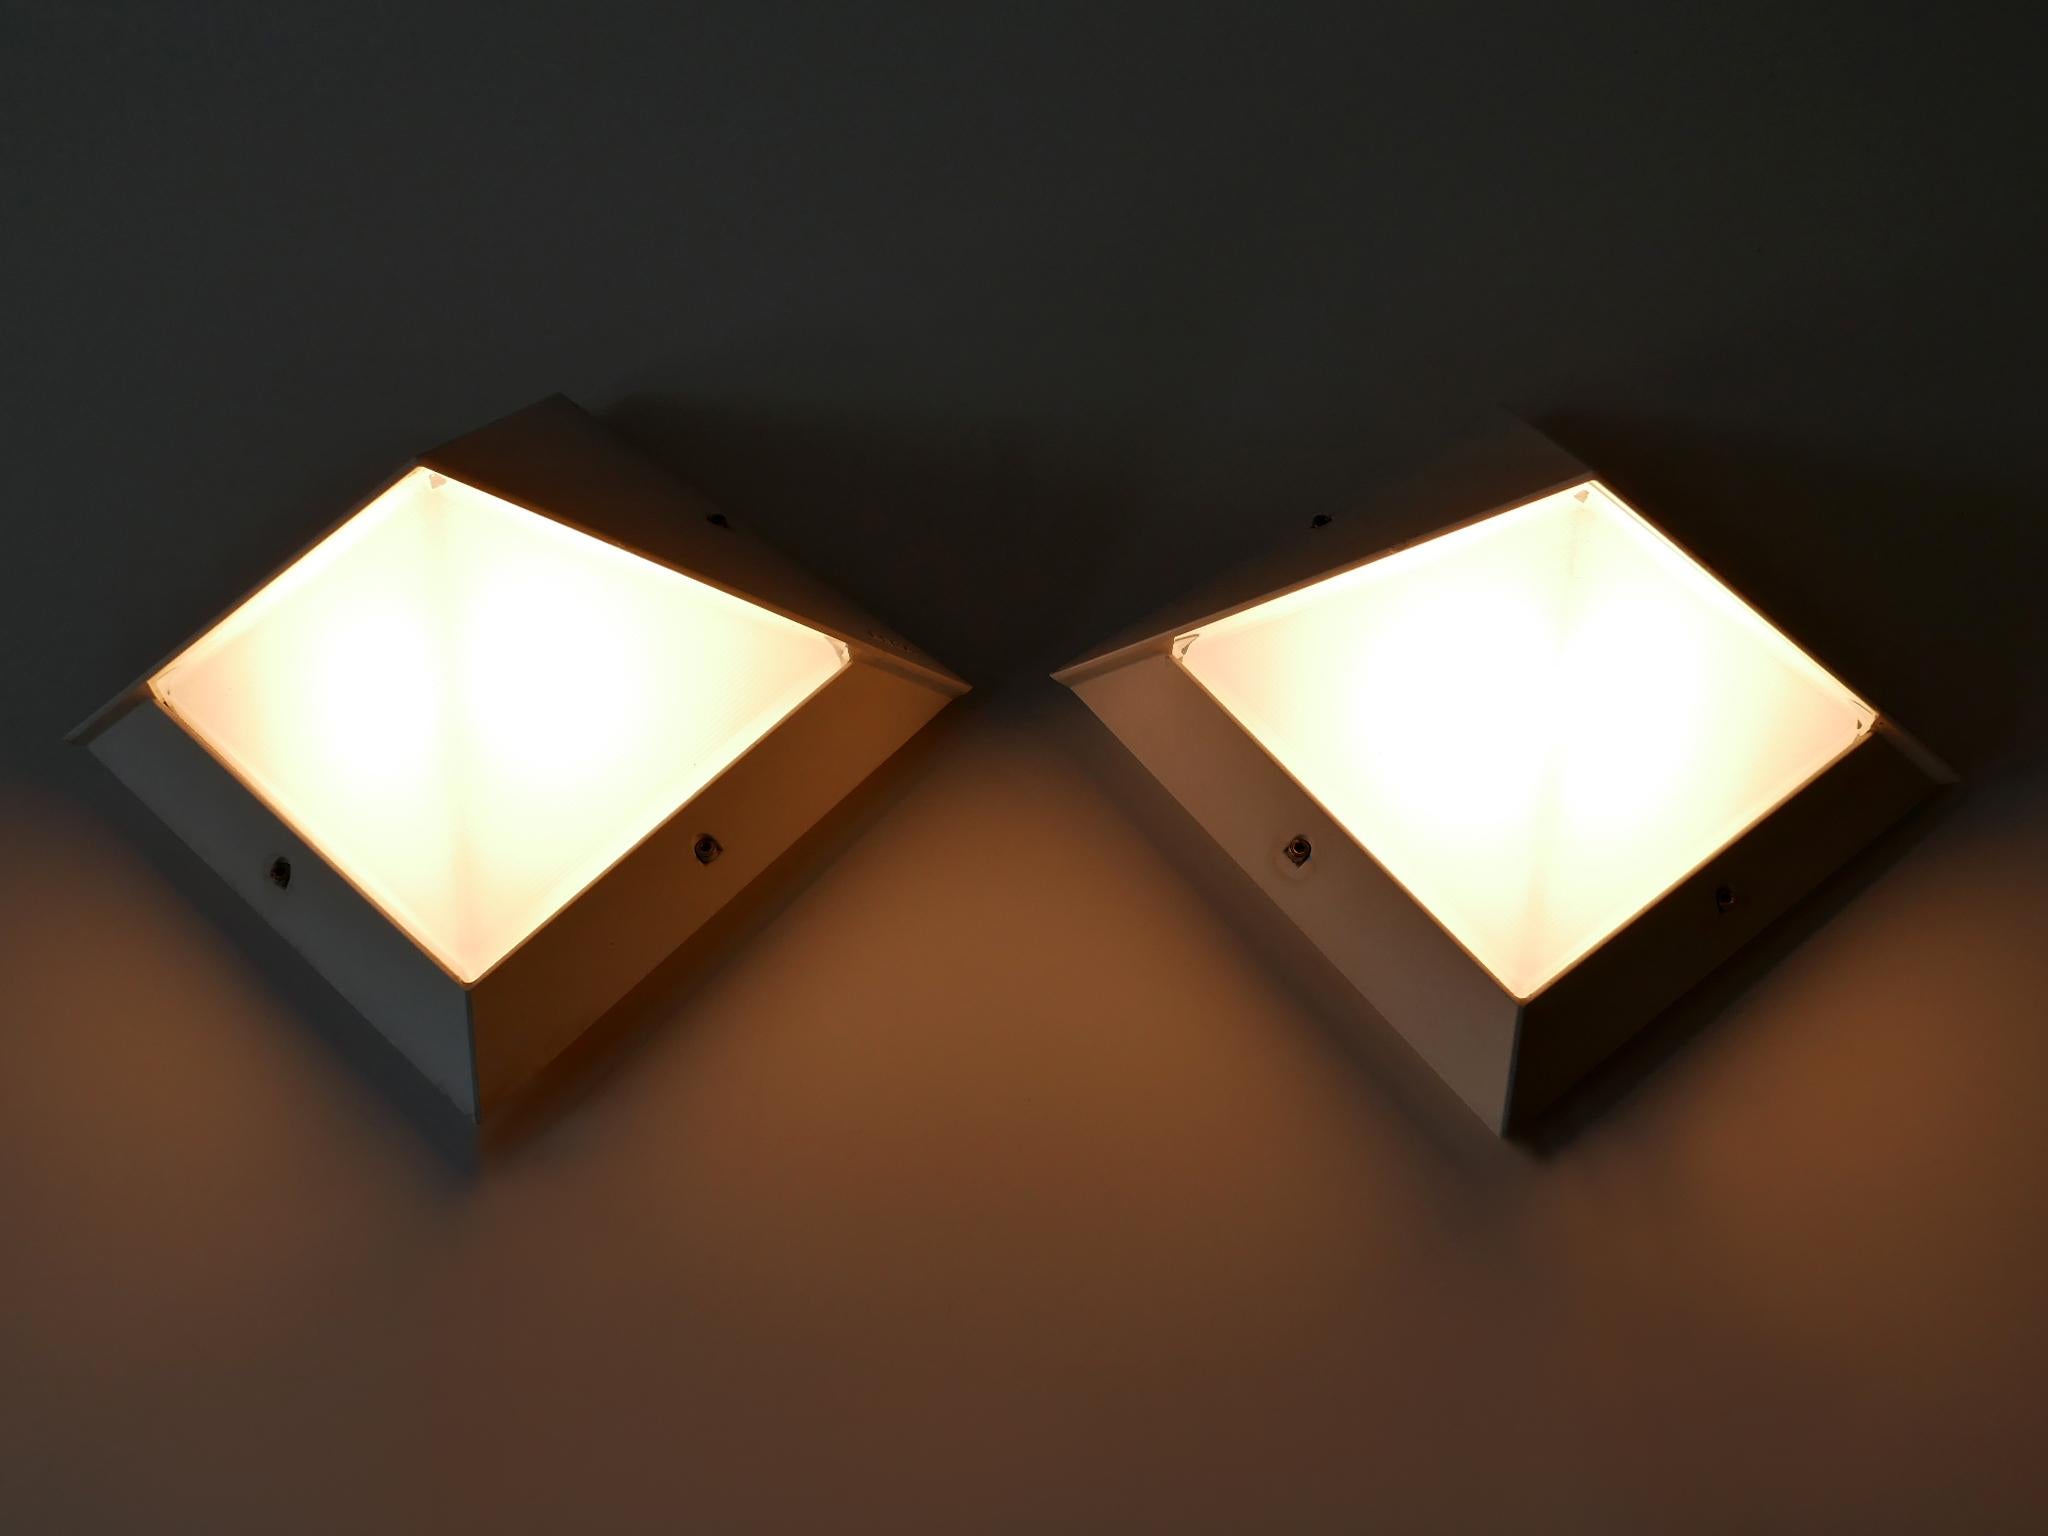 Set of Two Medium Outdoor Wall Lamps or Sconces by BEGA, 1980s, Germany For Sale 1